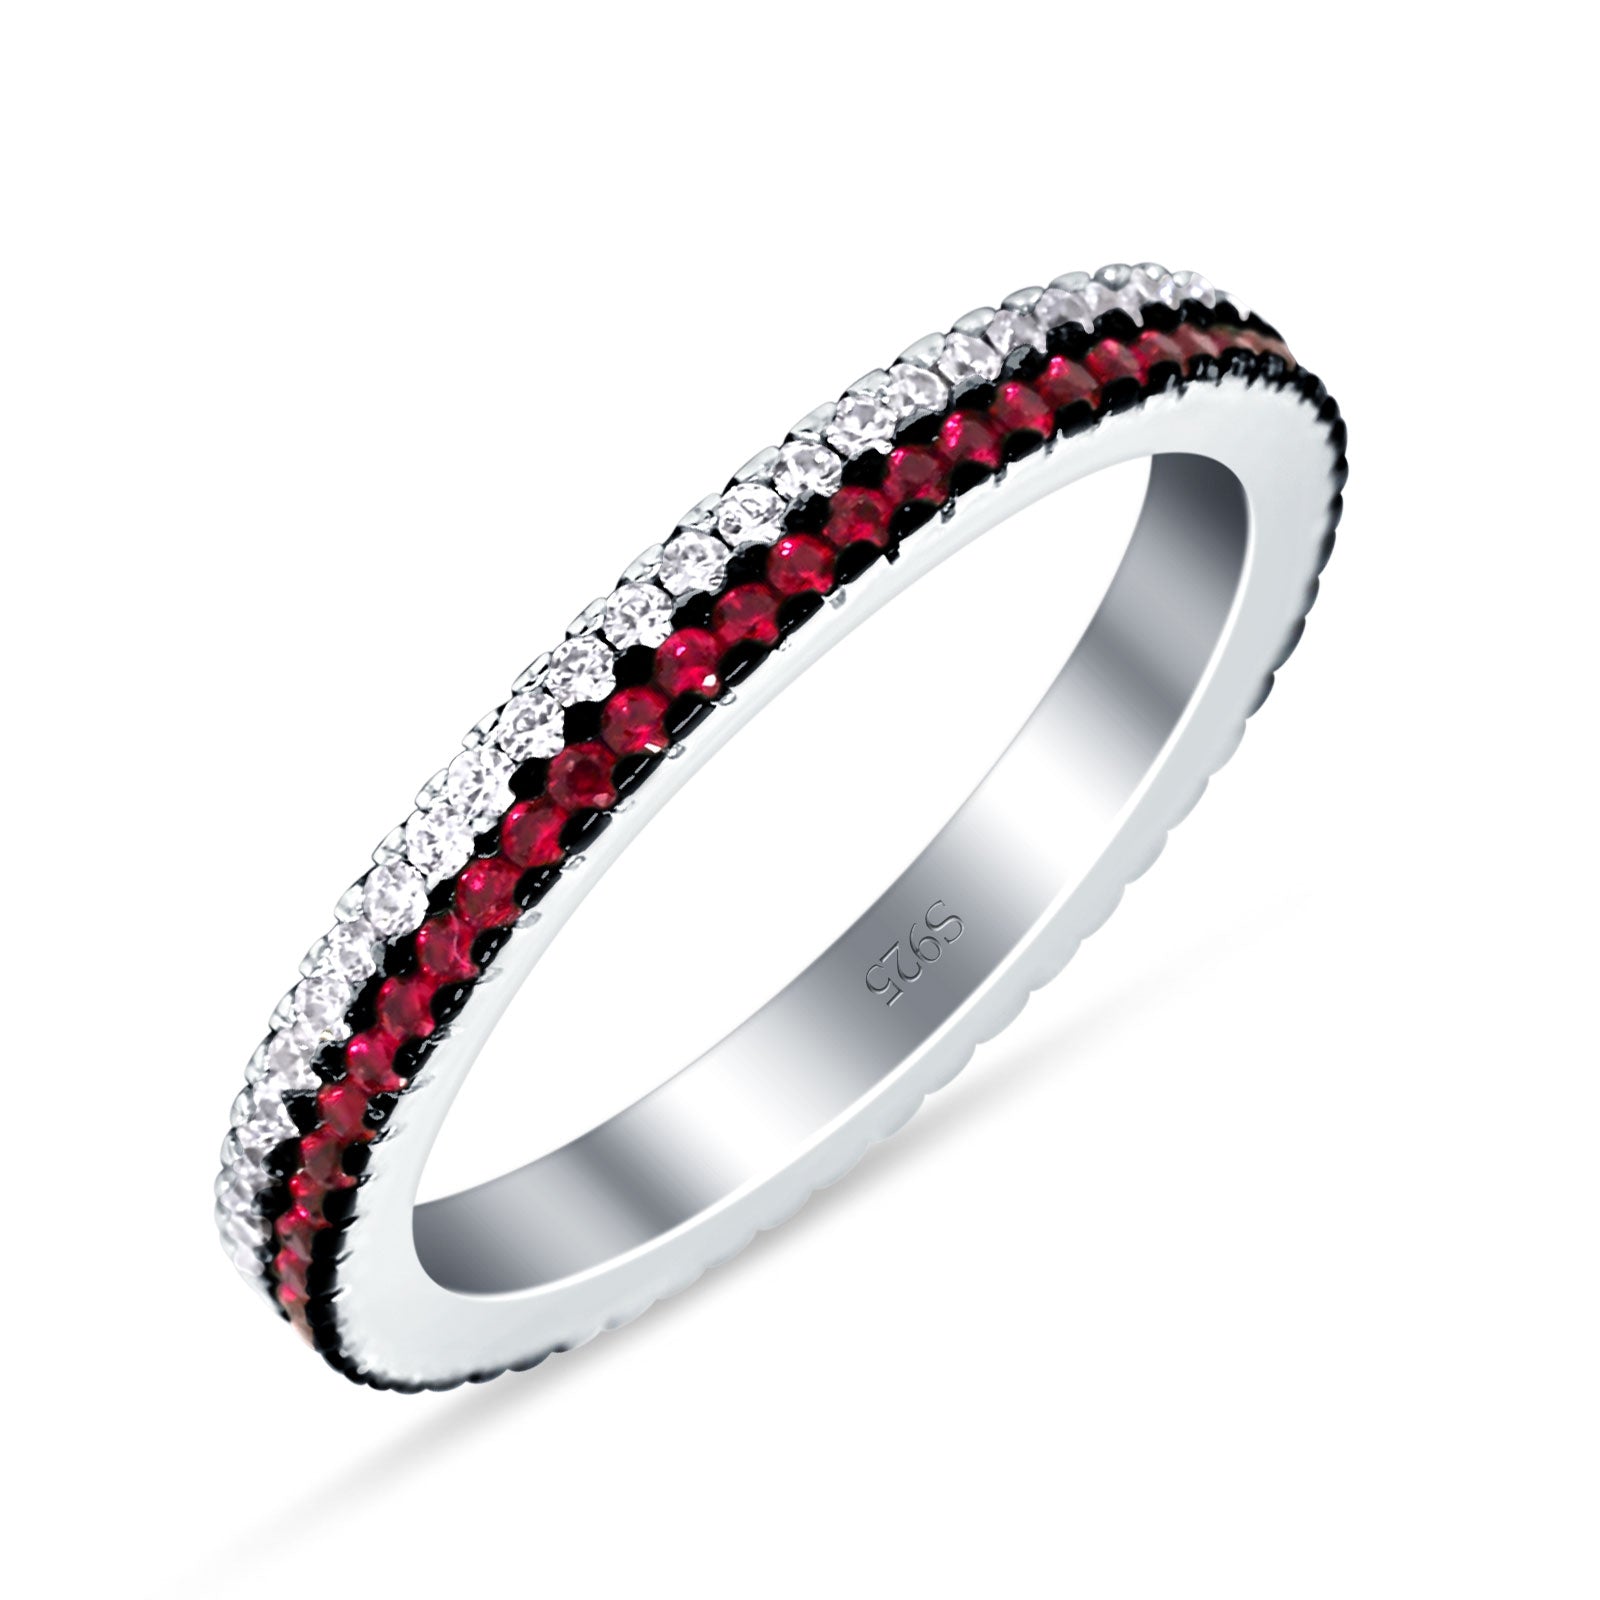 Full Eternity Rings Stackable Band Round Ruby Cubic Zirconia 925 Sterling Silver